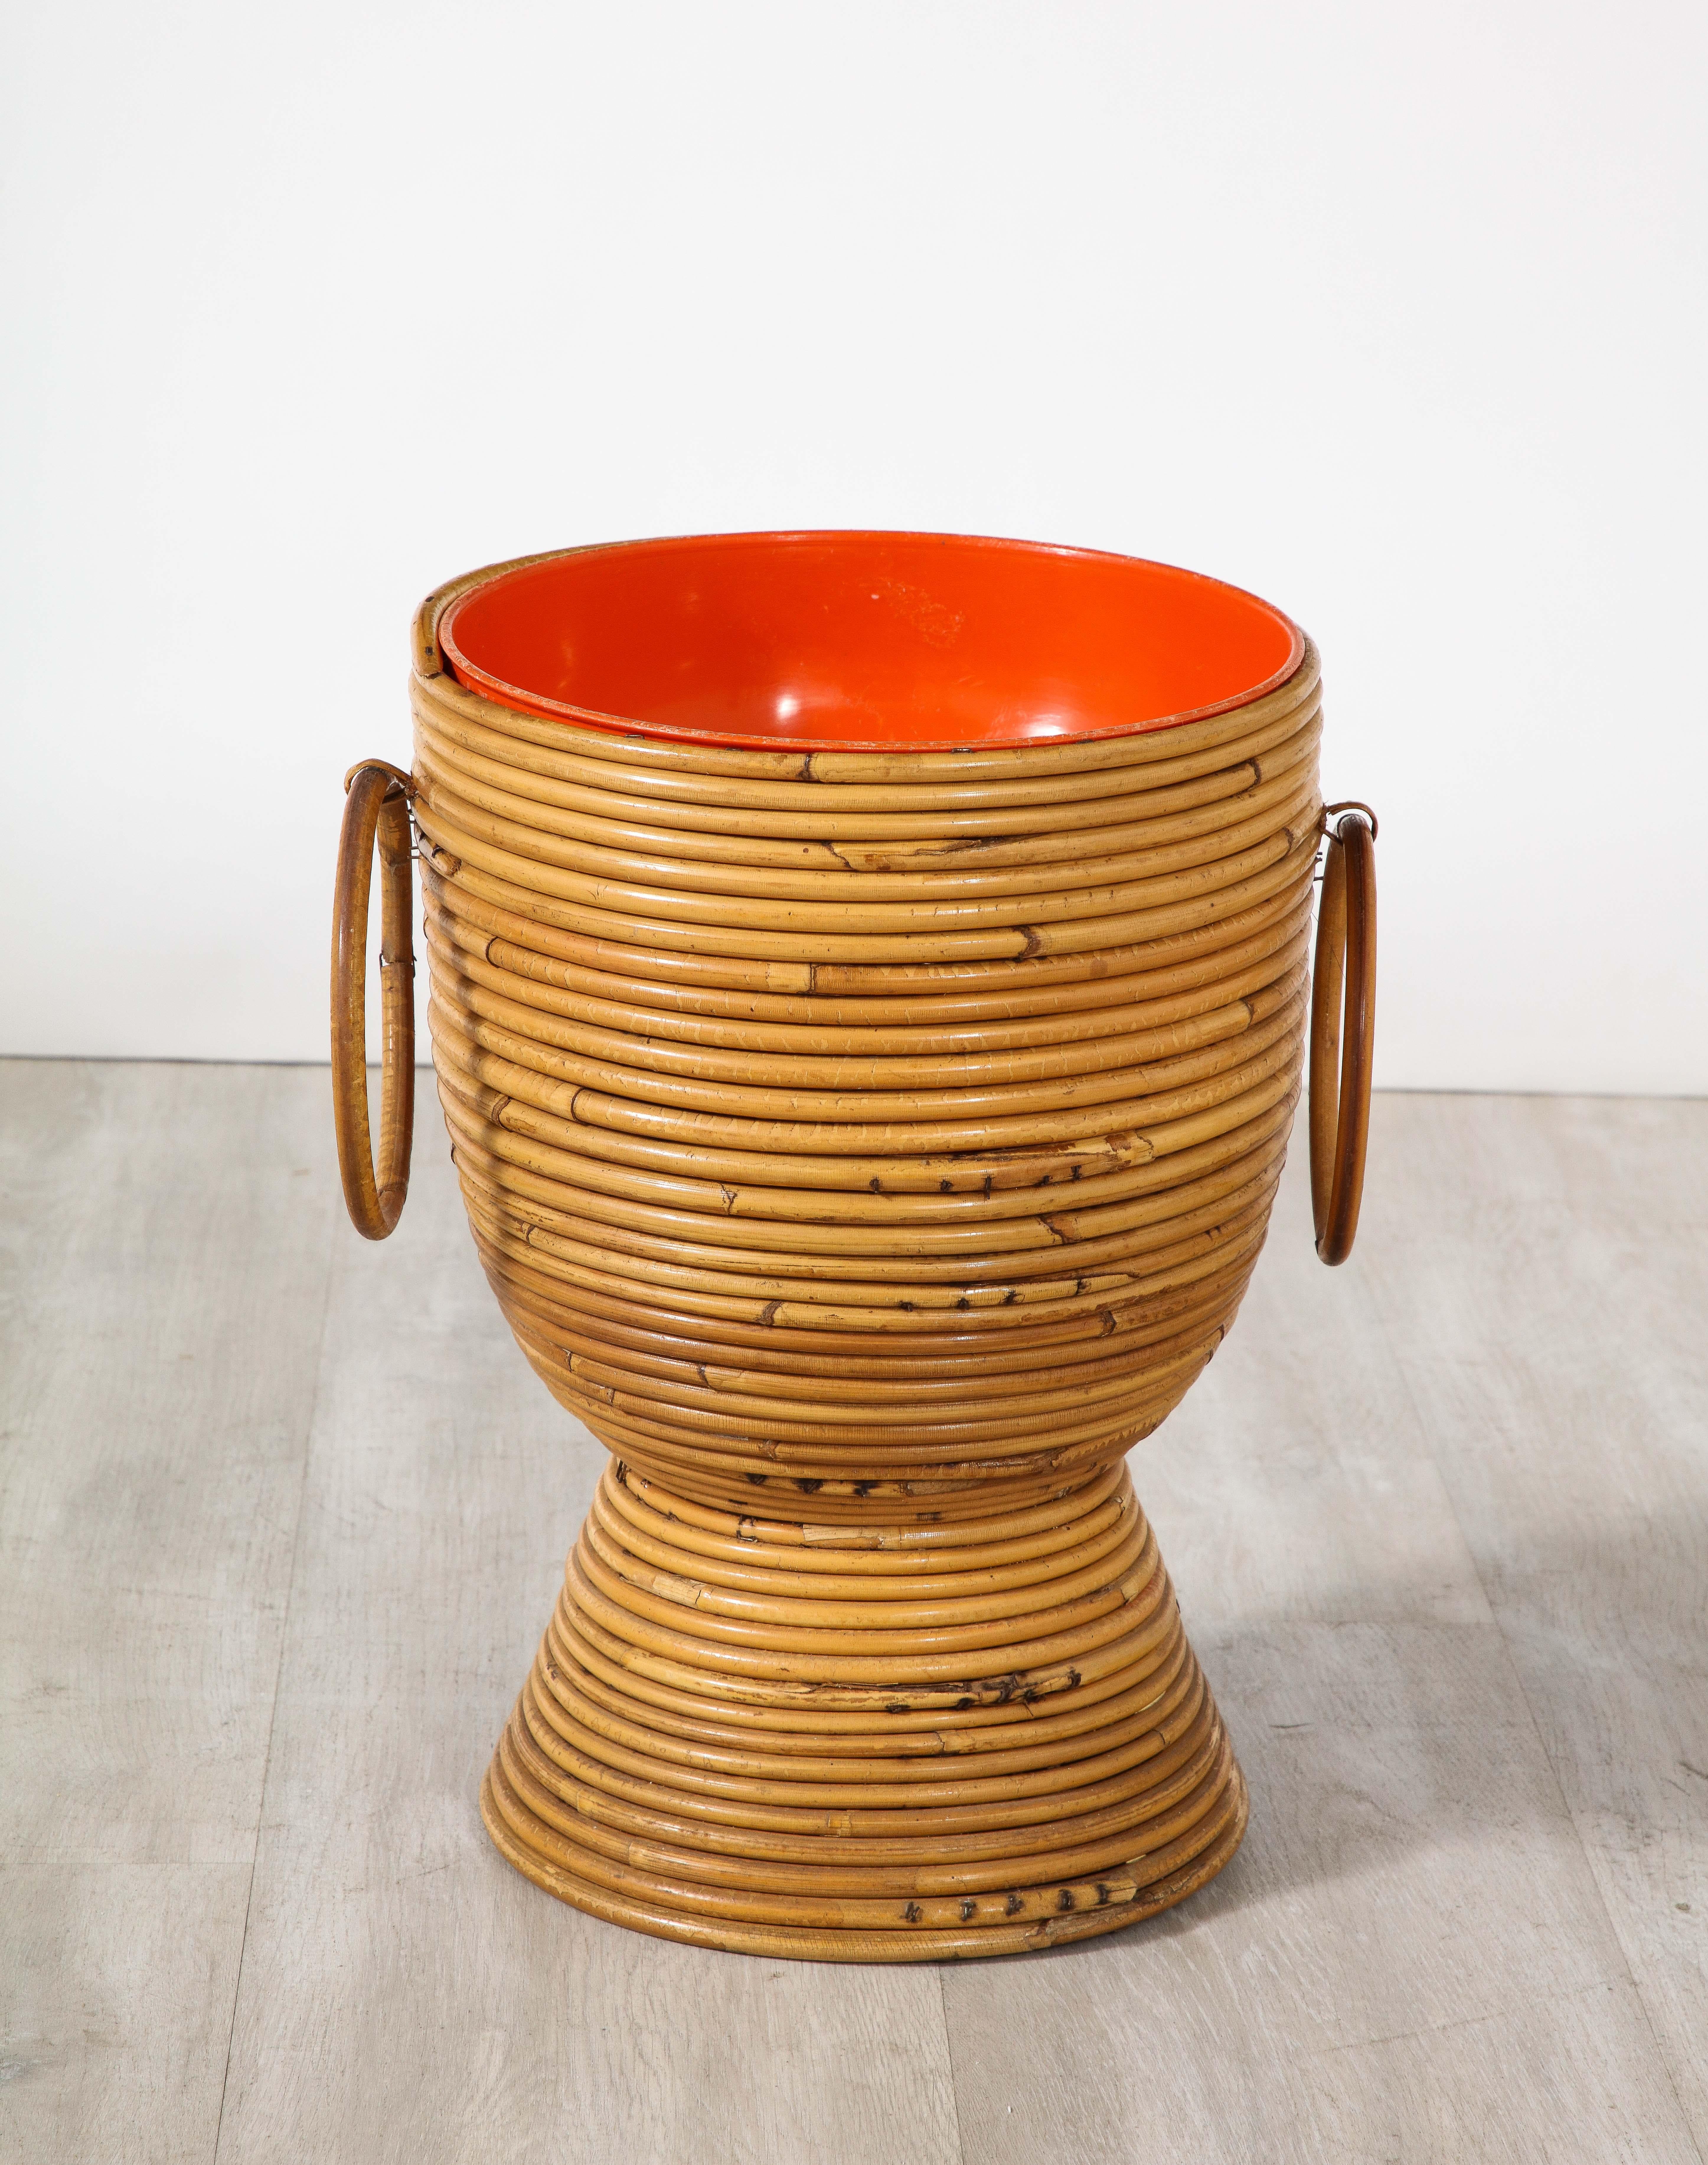 Italian 1950's bamboo ice bucket/wine holder with decorative ring handles and inset orange/red plastic liner. 
Can be used as a planter, flower basket, vase or decorative bowl. Whimsical, earthy and charming. 
Italy, circa 1950 
Size: 14